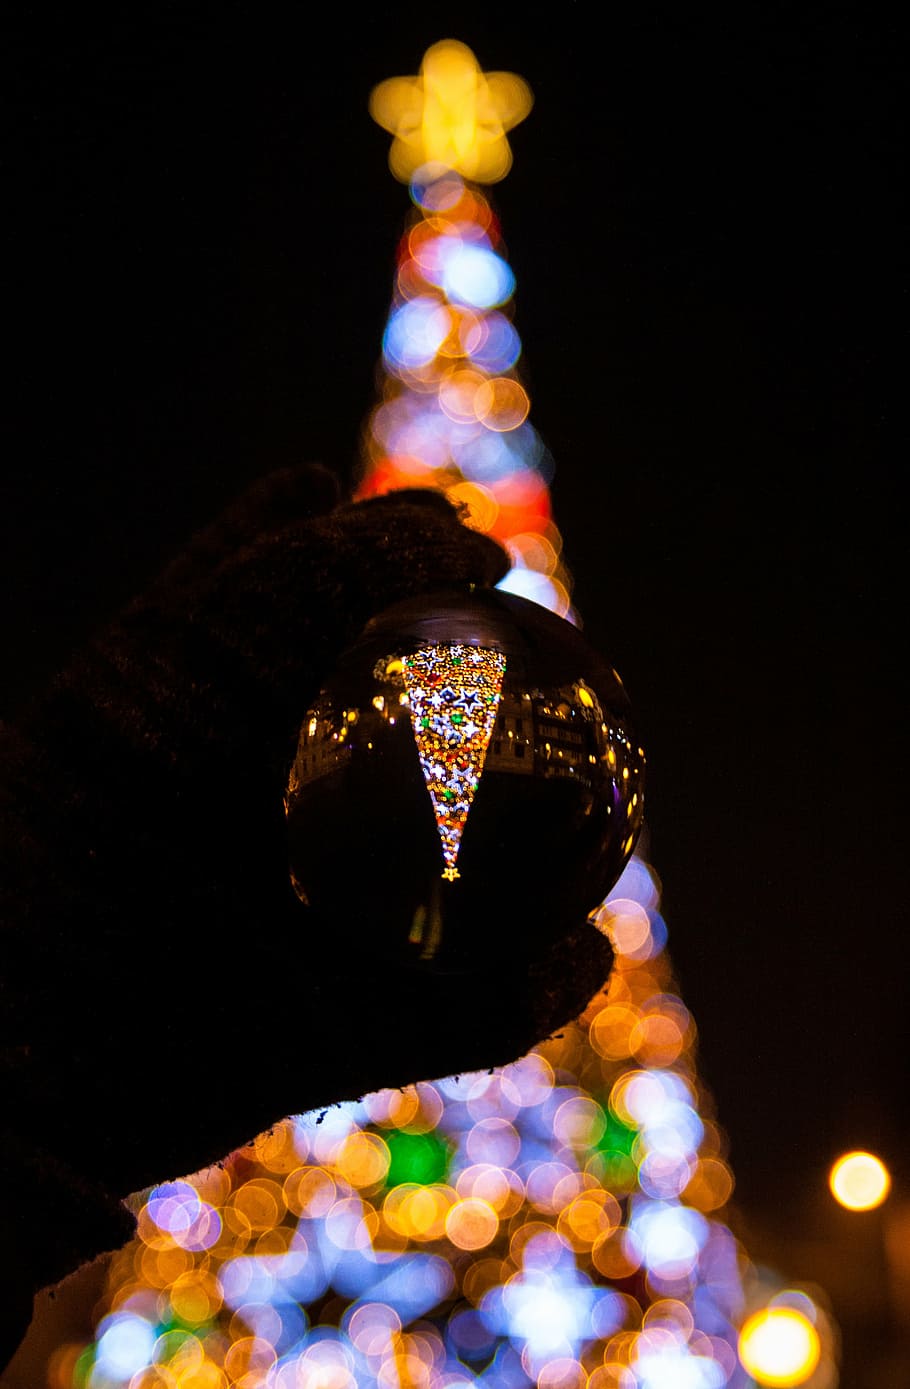 clear glass sphere, person, holding, glass, ball, nighttime, christmas, tree, lights, dark